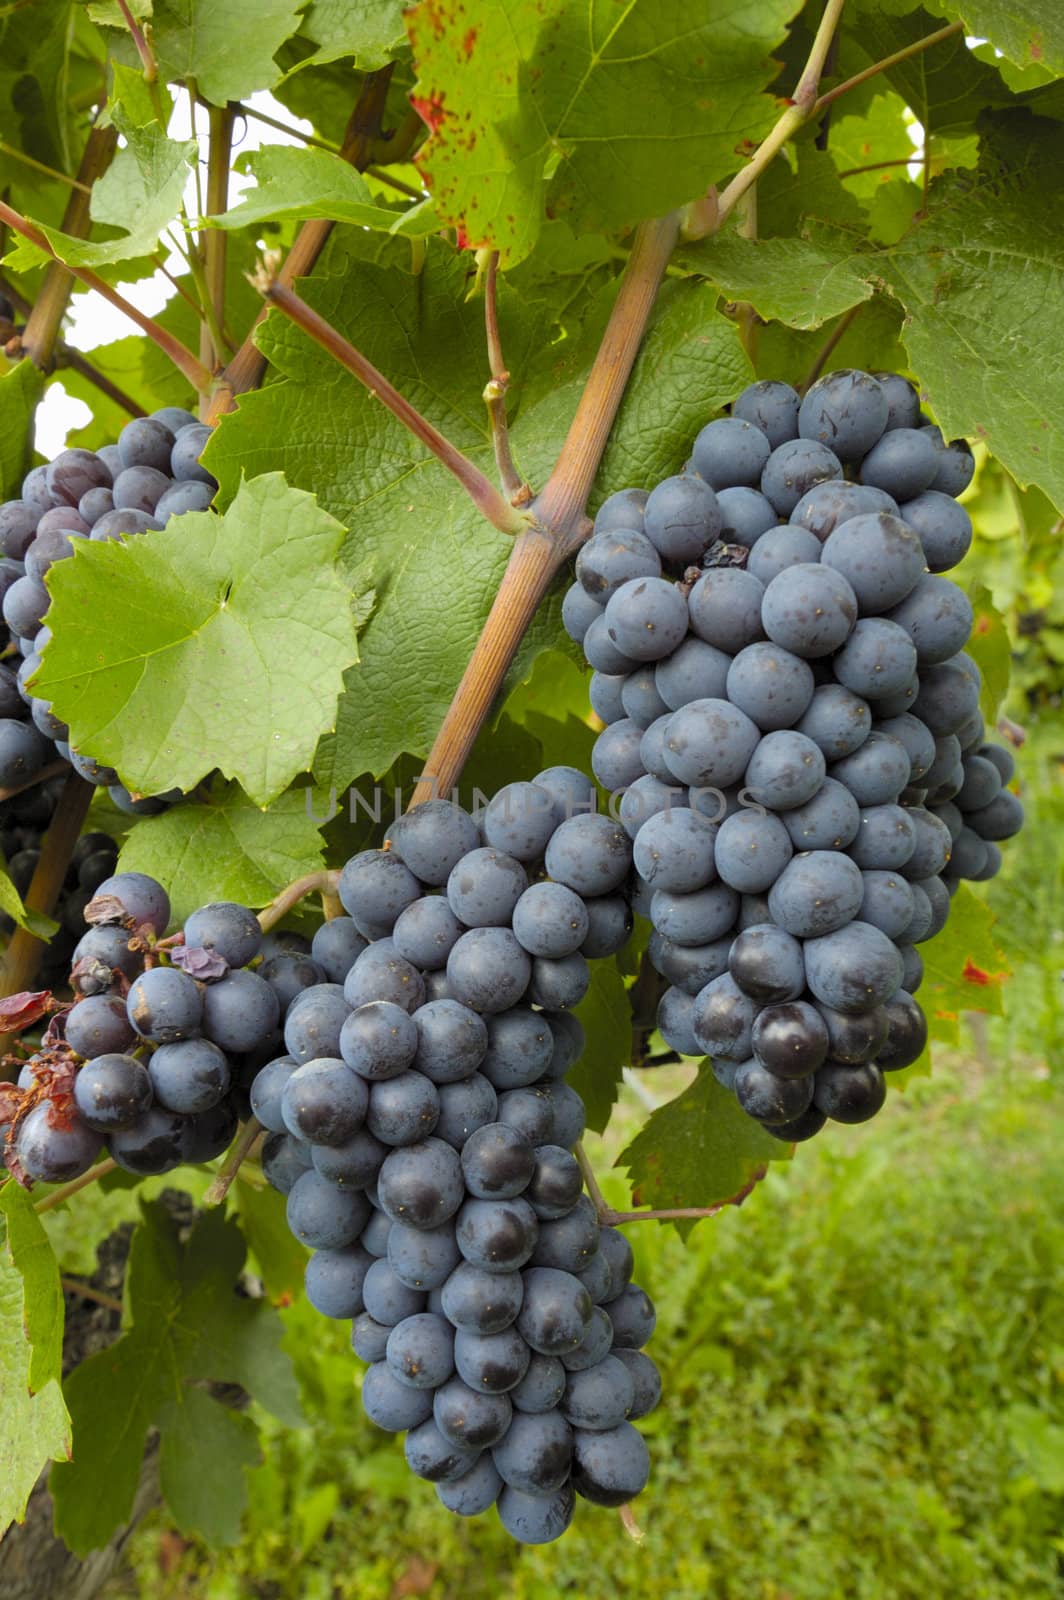 Bunches of black grapes ripening on a vine in Switzerland. More vines can be seen, out of focus, in the background.